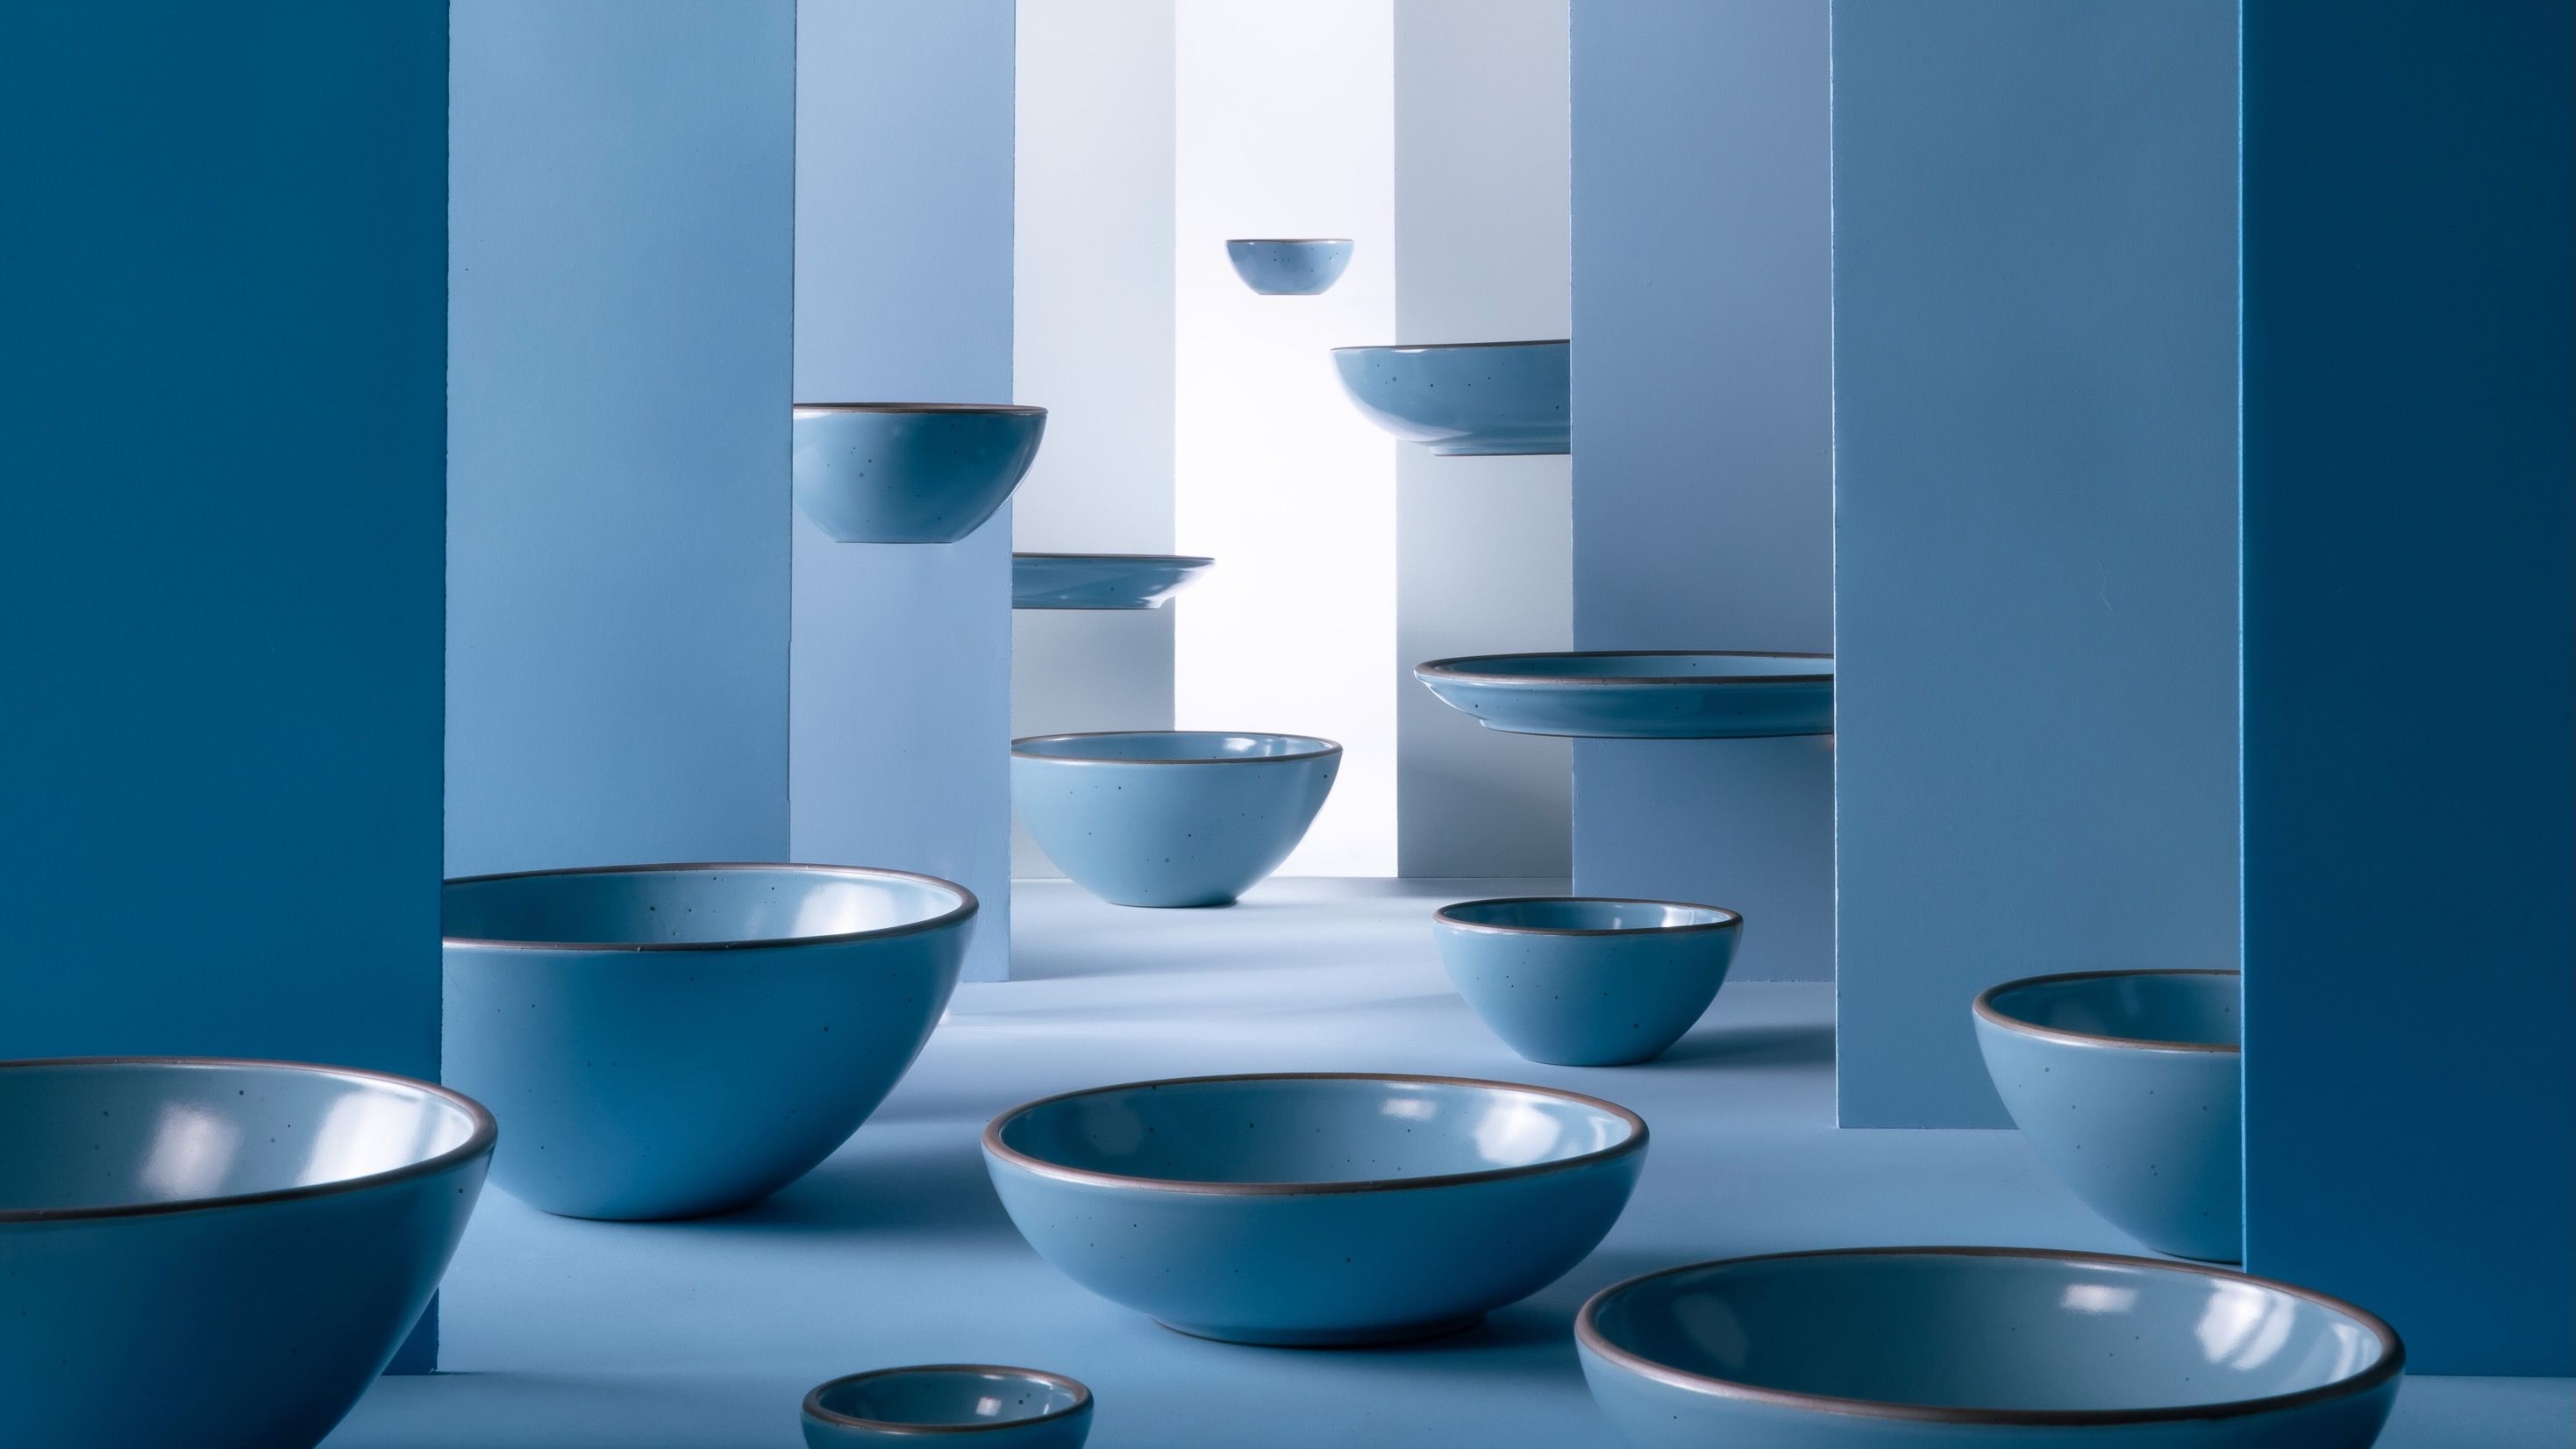 Ceramic bowls in a robin's egg blue color are artfully styled together among large walls in varying shades of blue. In the background, the bowls levitate in the air.